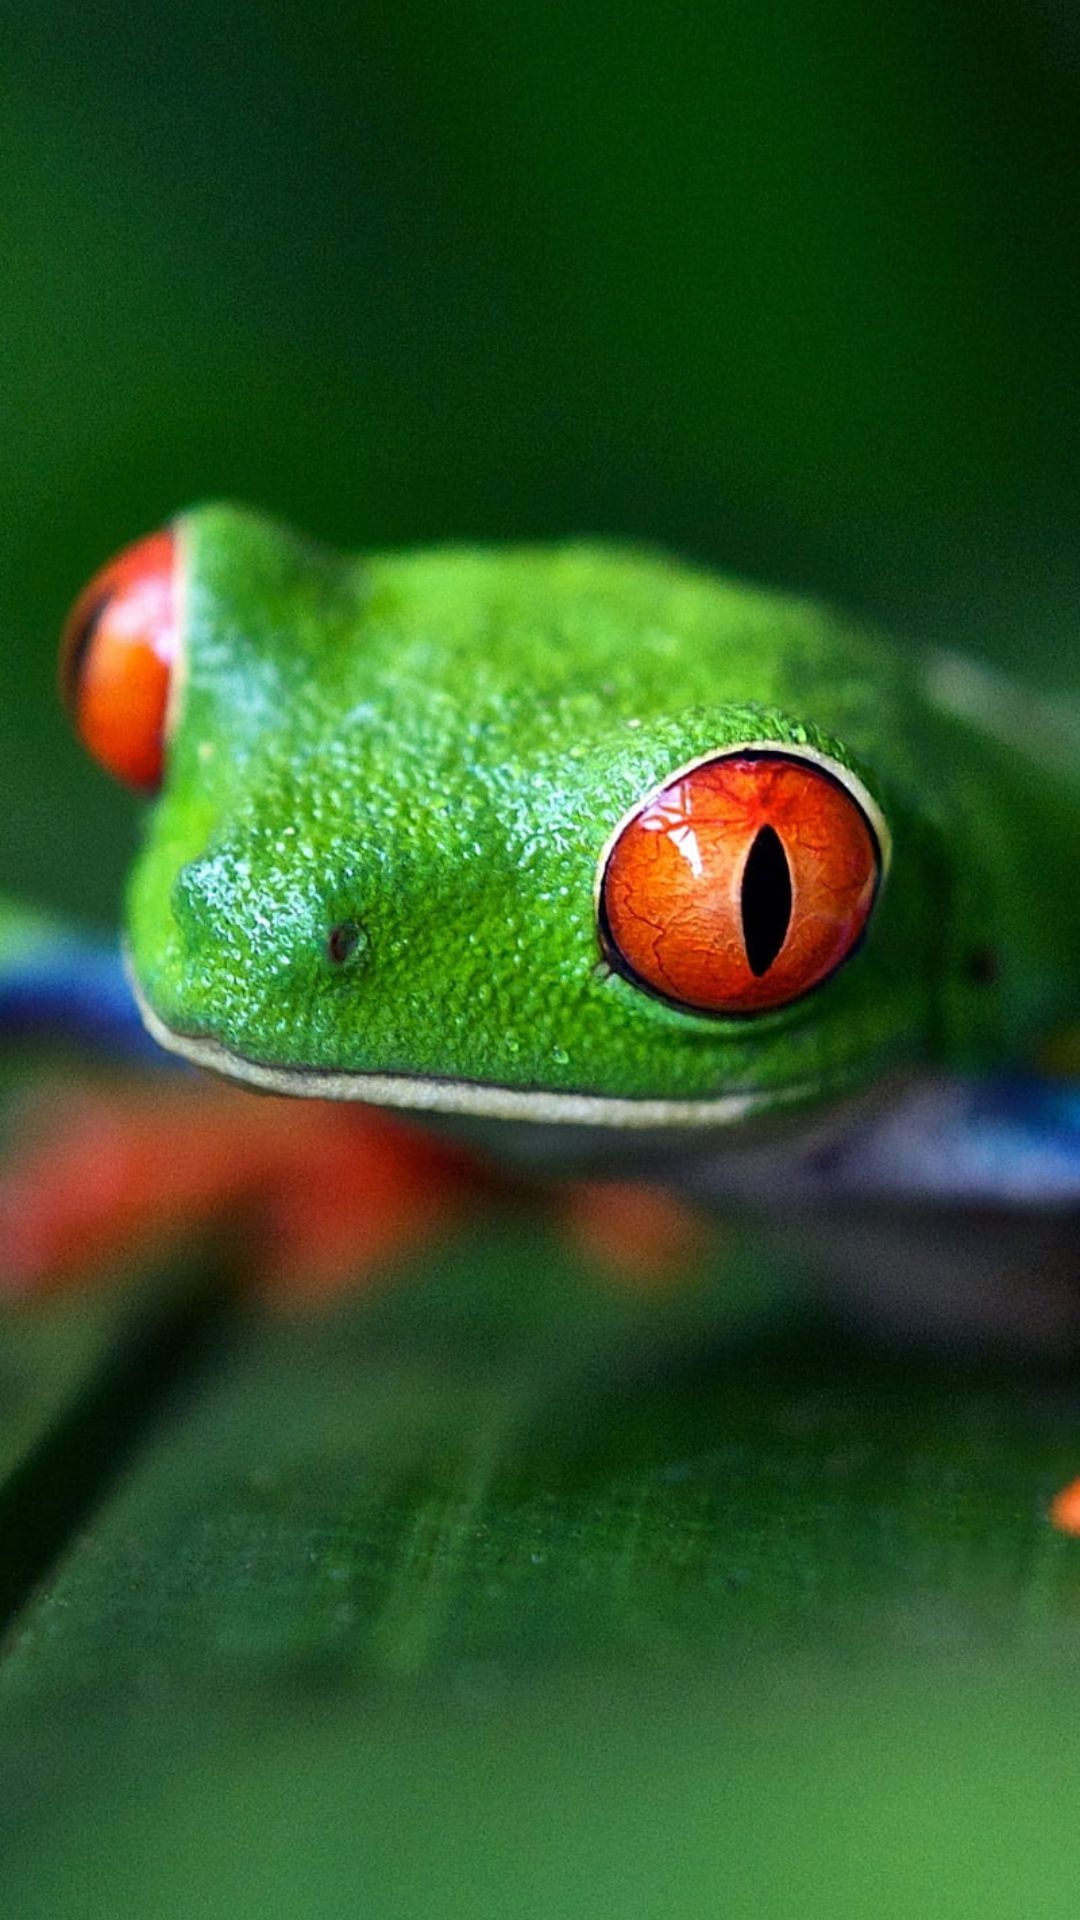 Green Tree Frog, Nature's marvel, Vibrant wallpapers, Mobile backgrounds, 1080x1920 Full HD Phone